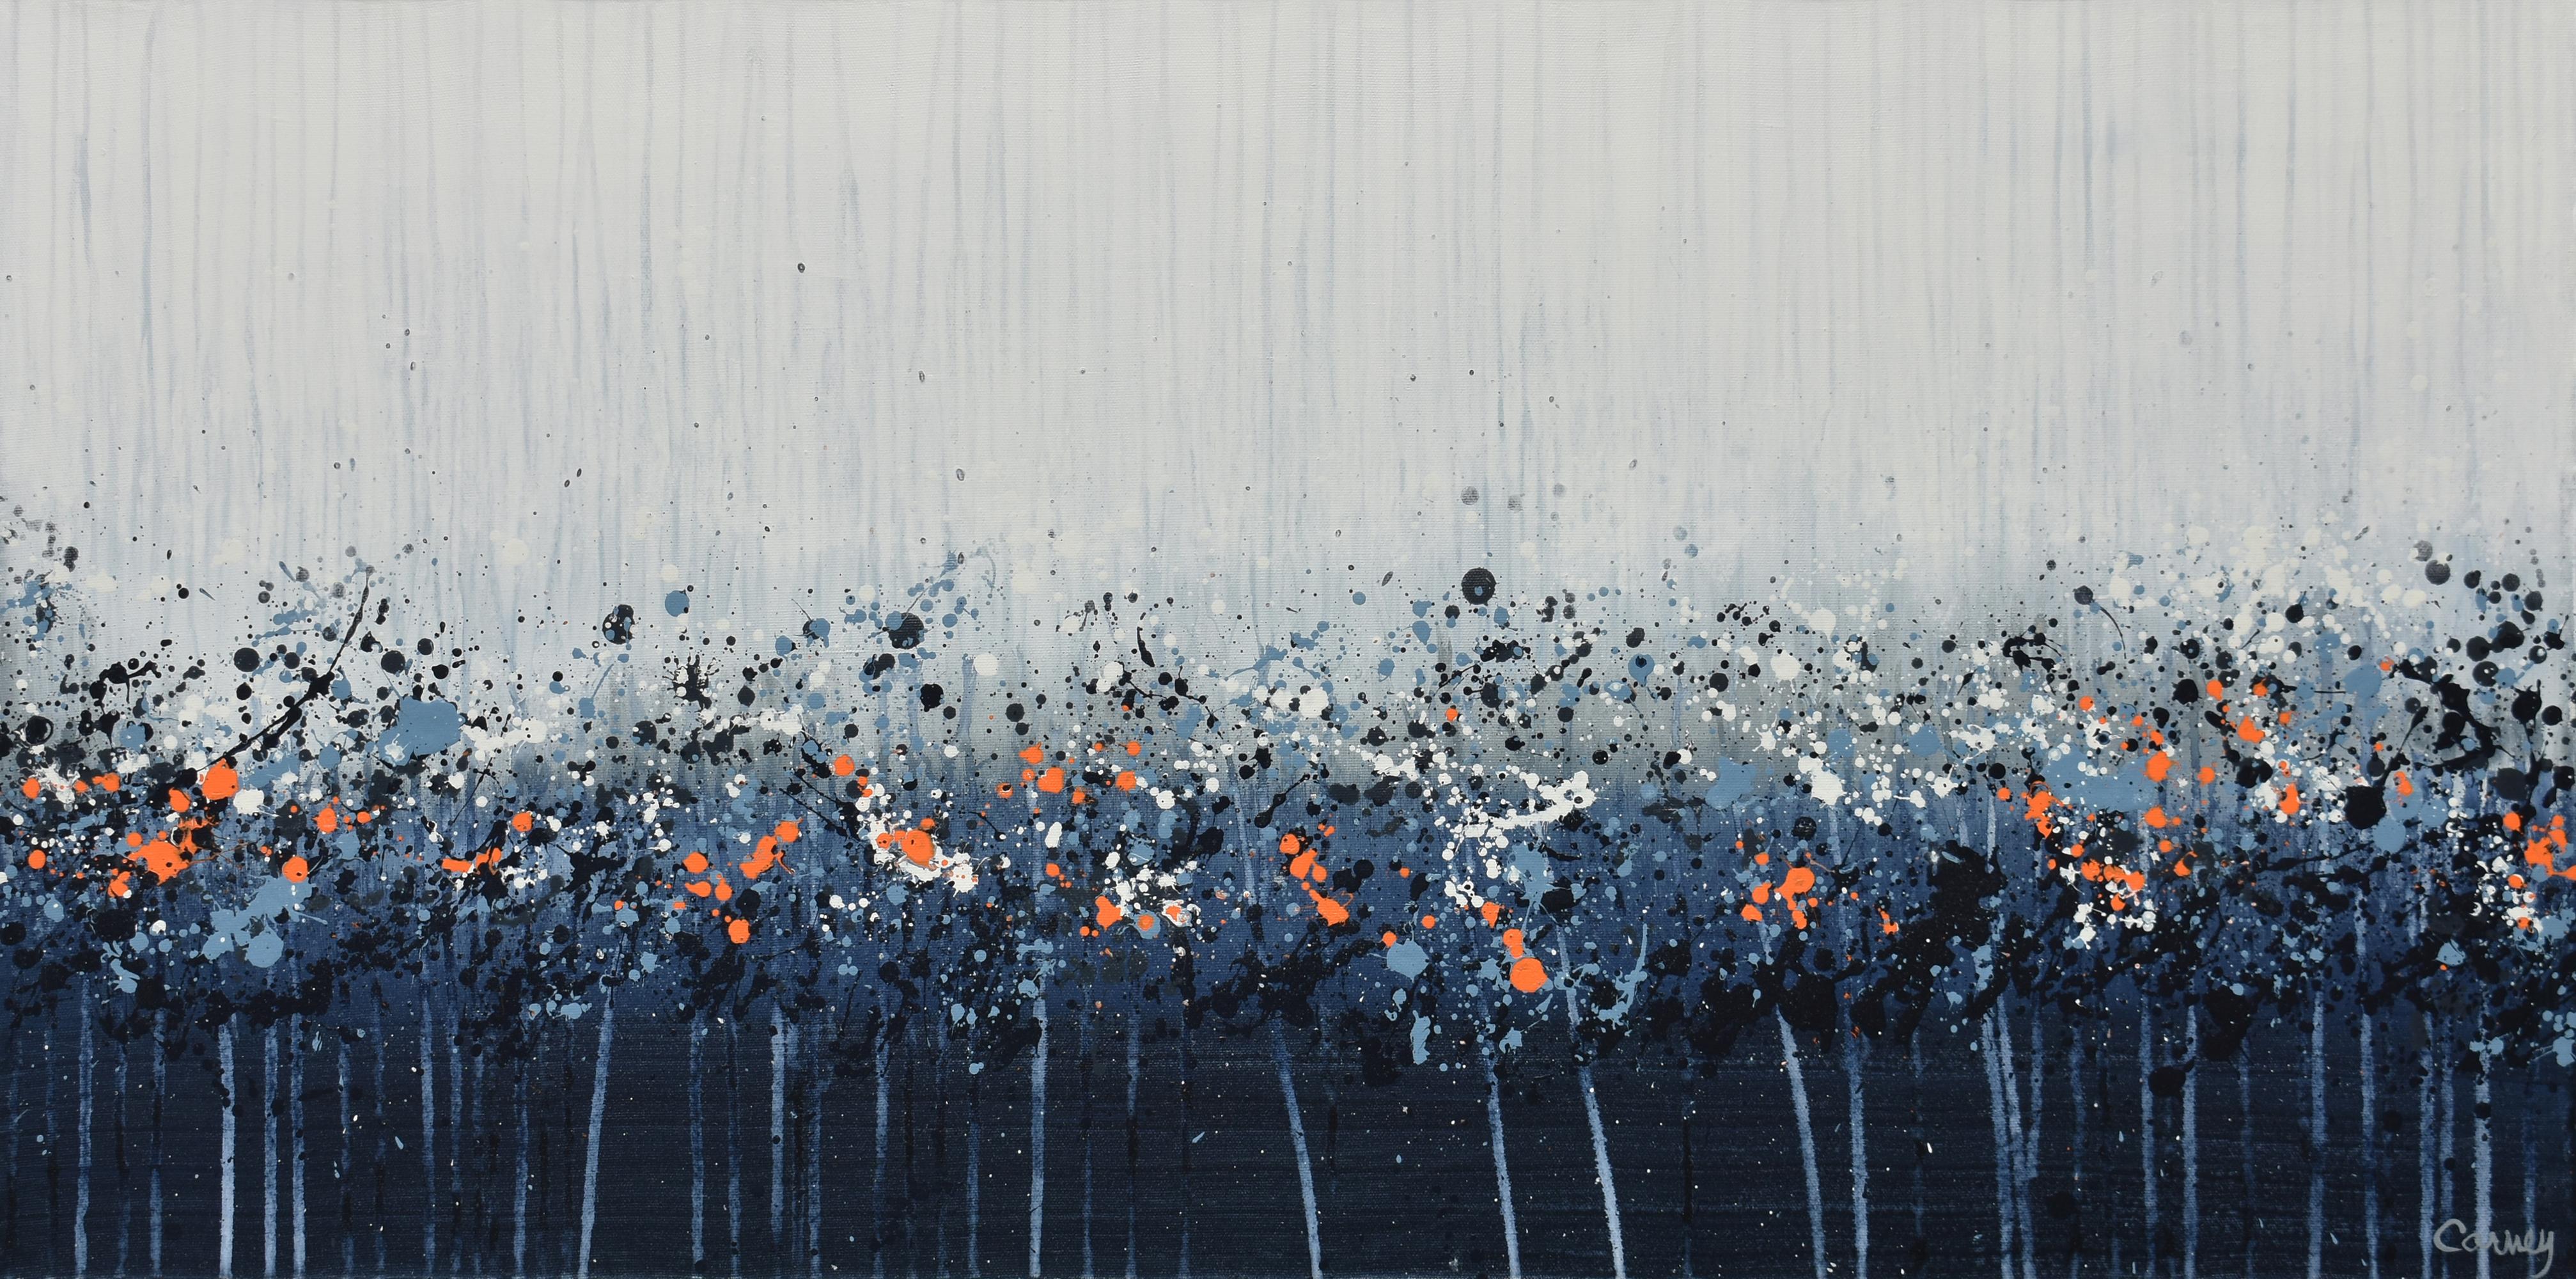 <p>Artist Comments<br />Part of artist Lisa Carney's GeoFlora series of intensely mesmerizing blossoms. She shares floral abstractions in a soothing atmospheric scene inspired by ocean mist. Bursts of orange, white, and blue-gray splatter along the